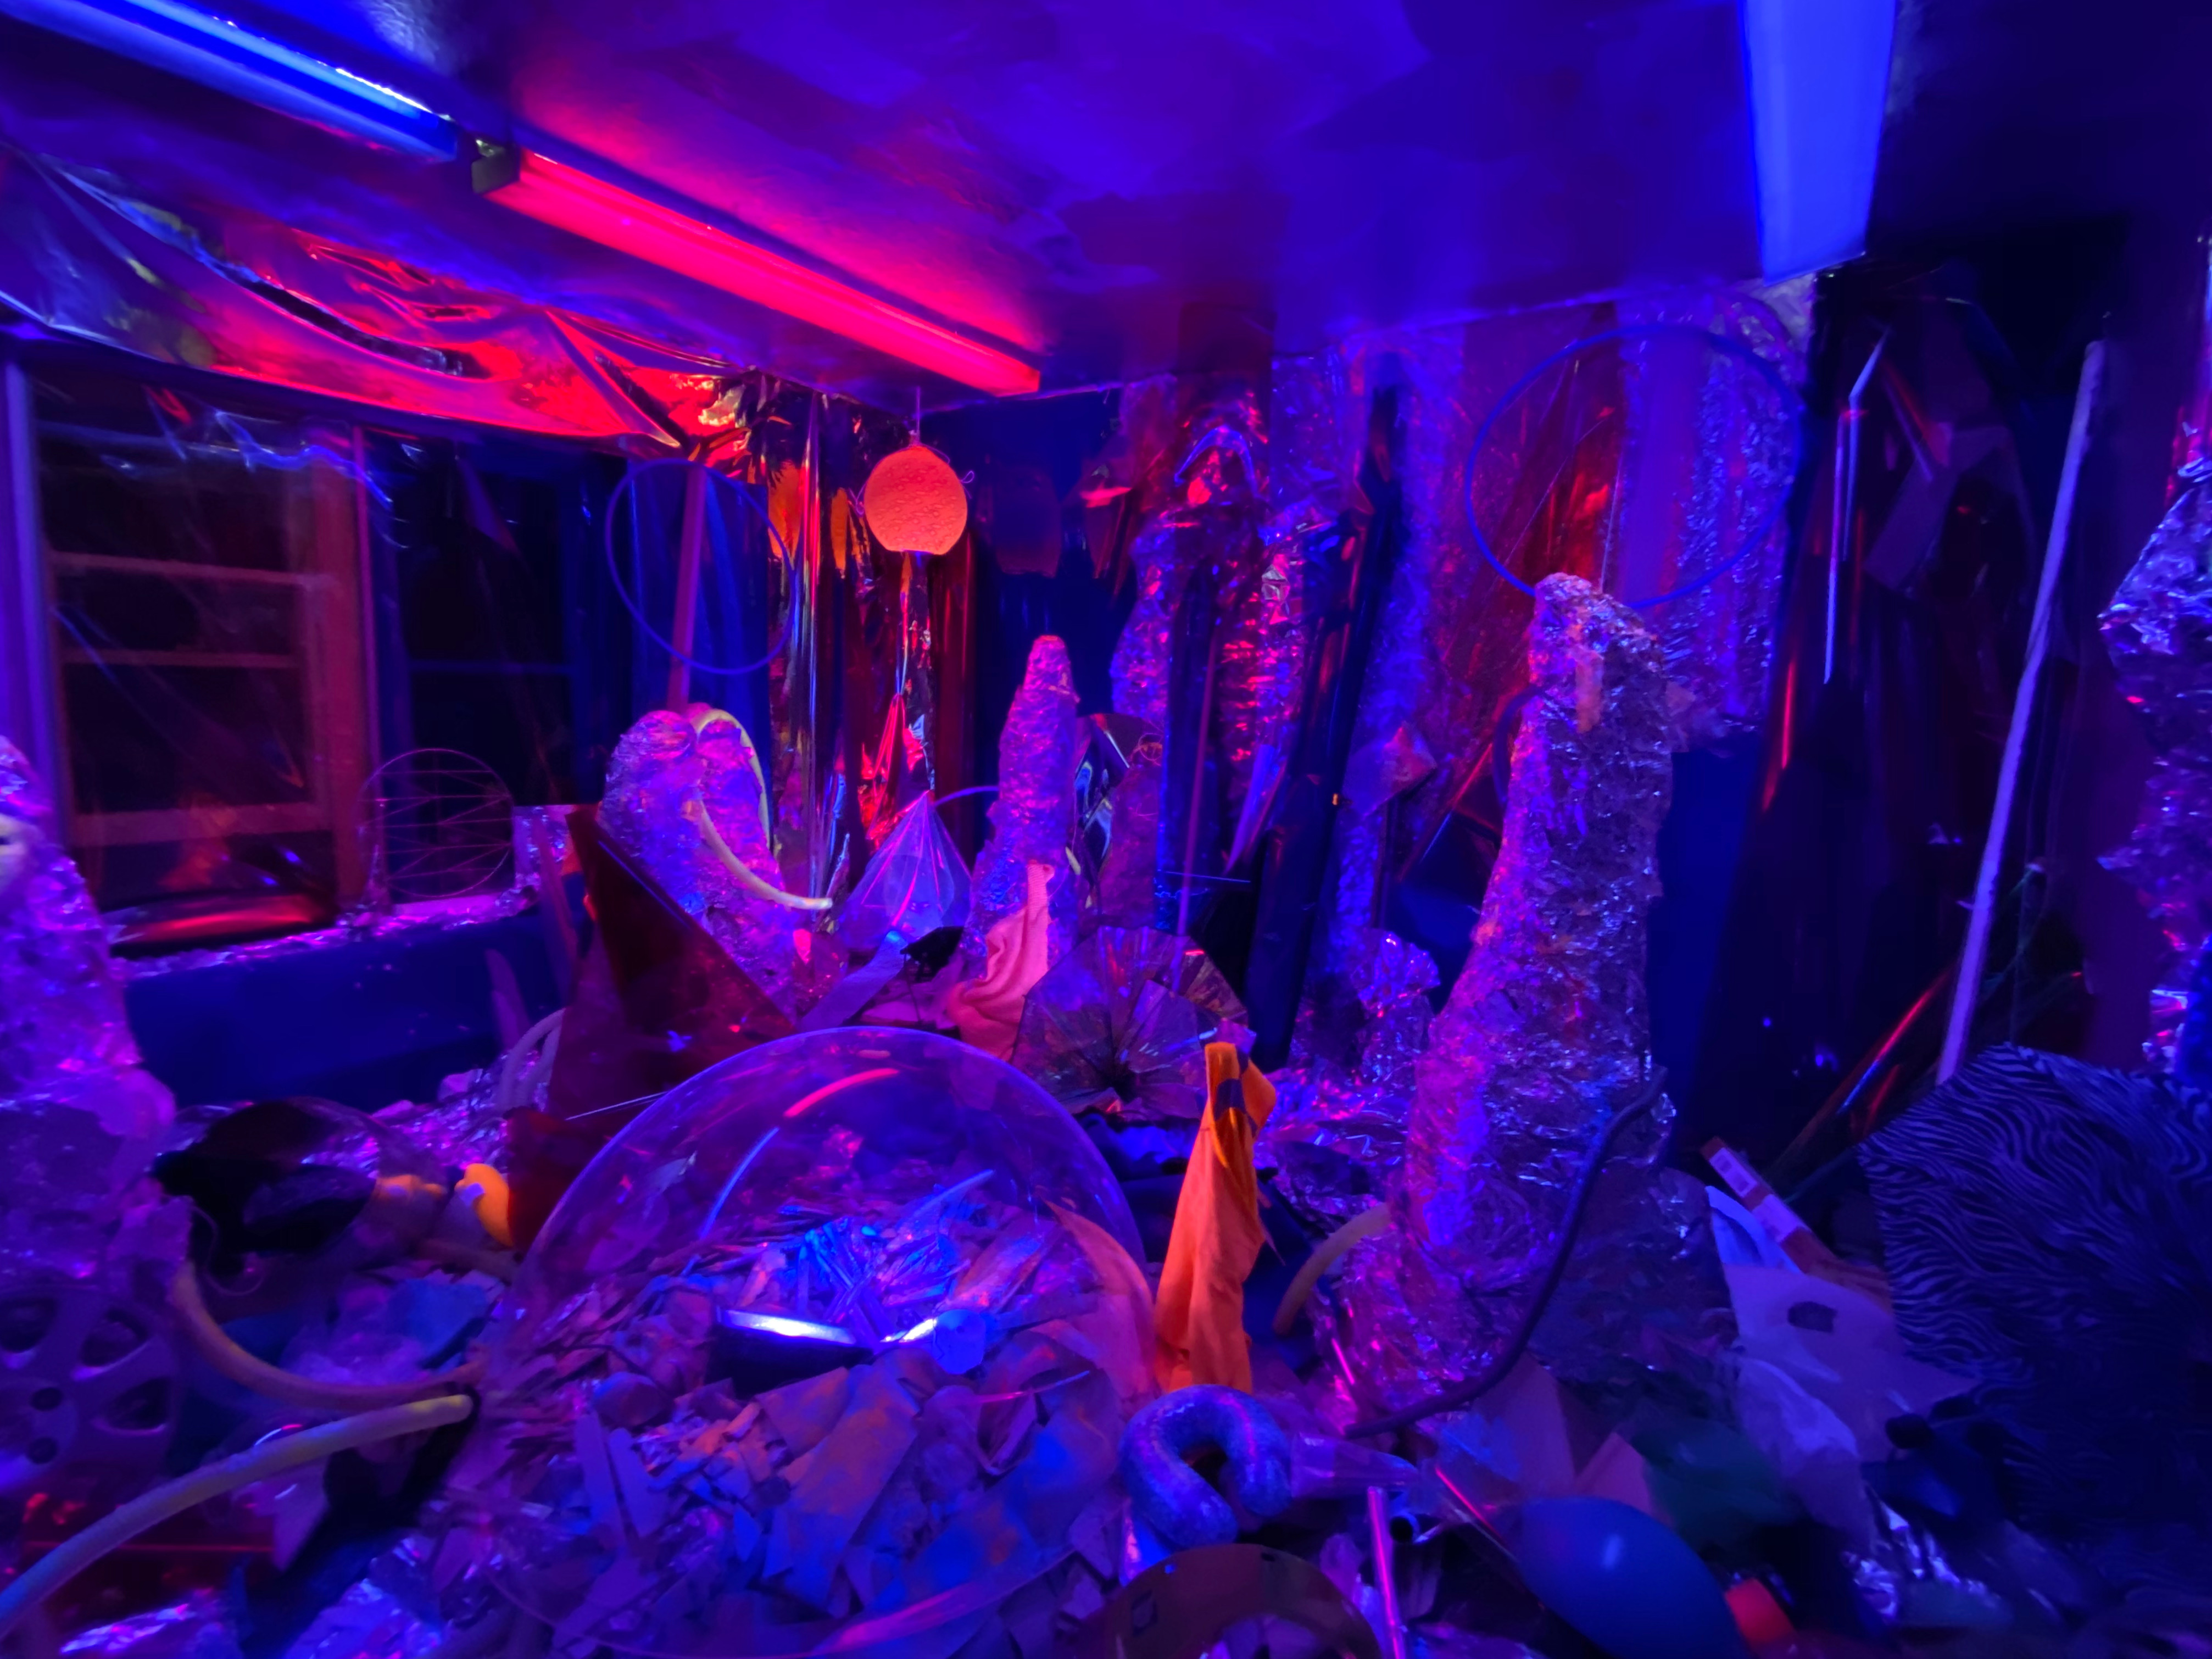 Tinfoil and clear orbs fill the room in a space-esque layout, illuminated by blue and red lights